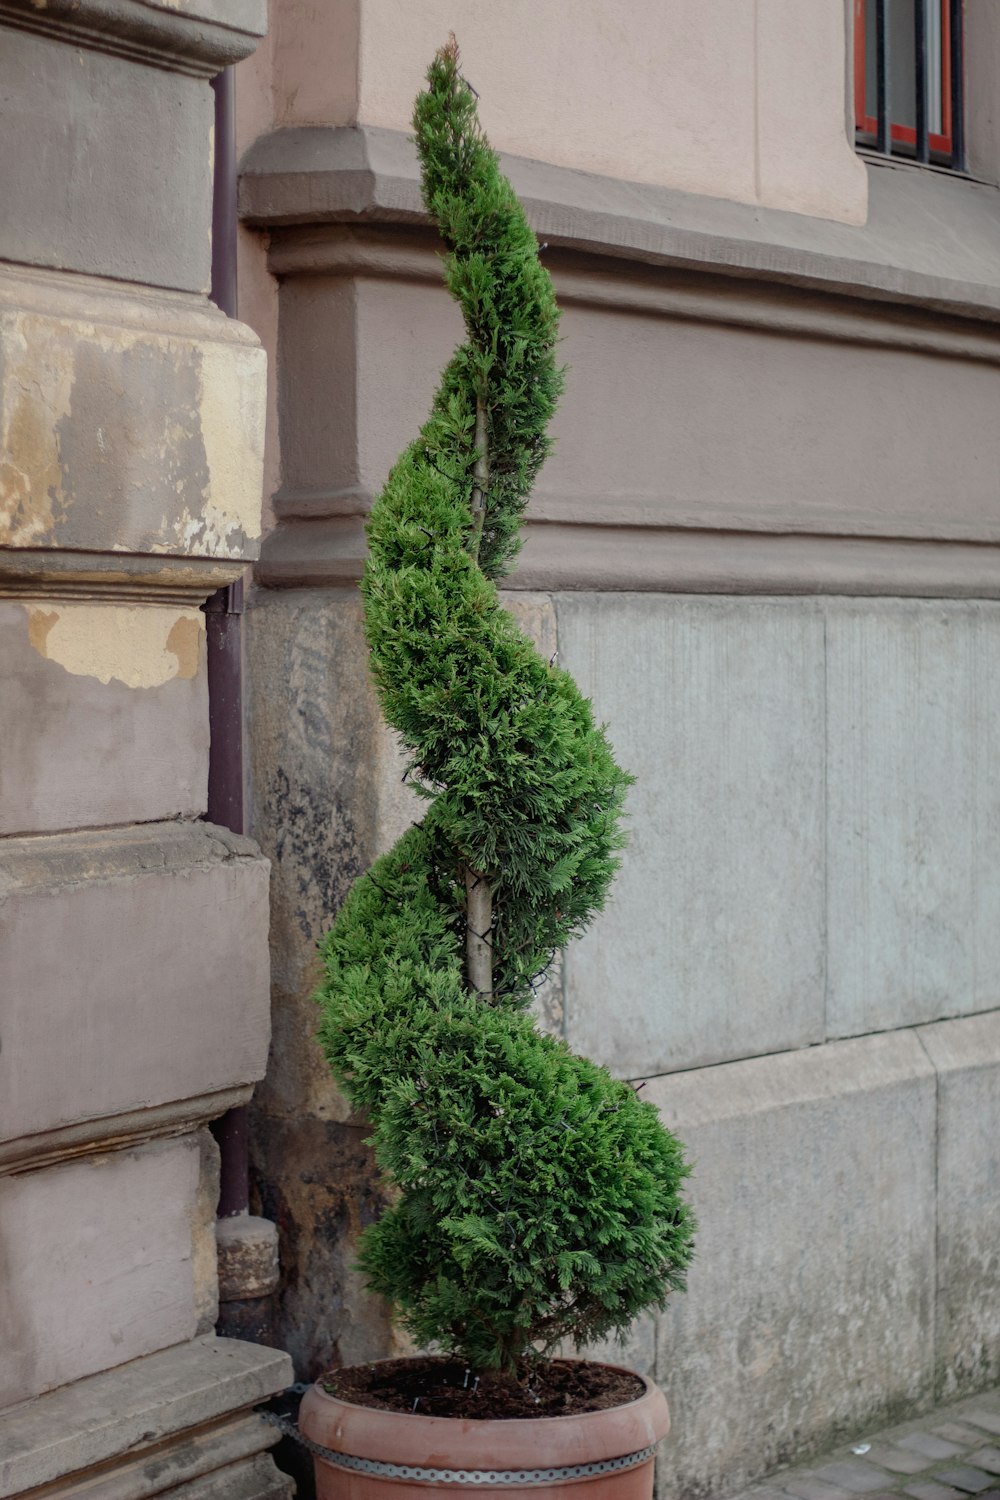 a potted plant on the side of a building